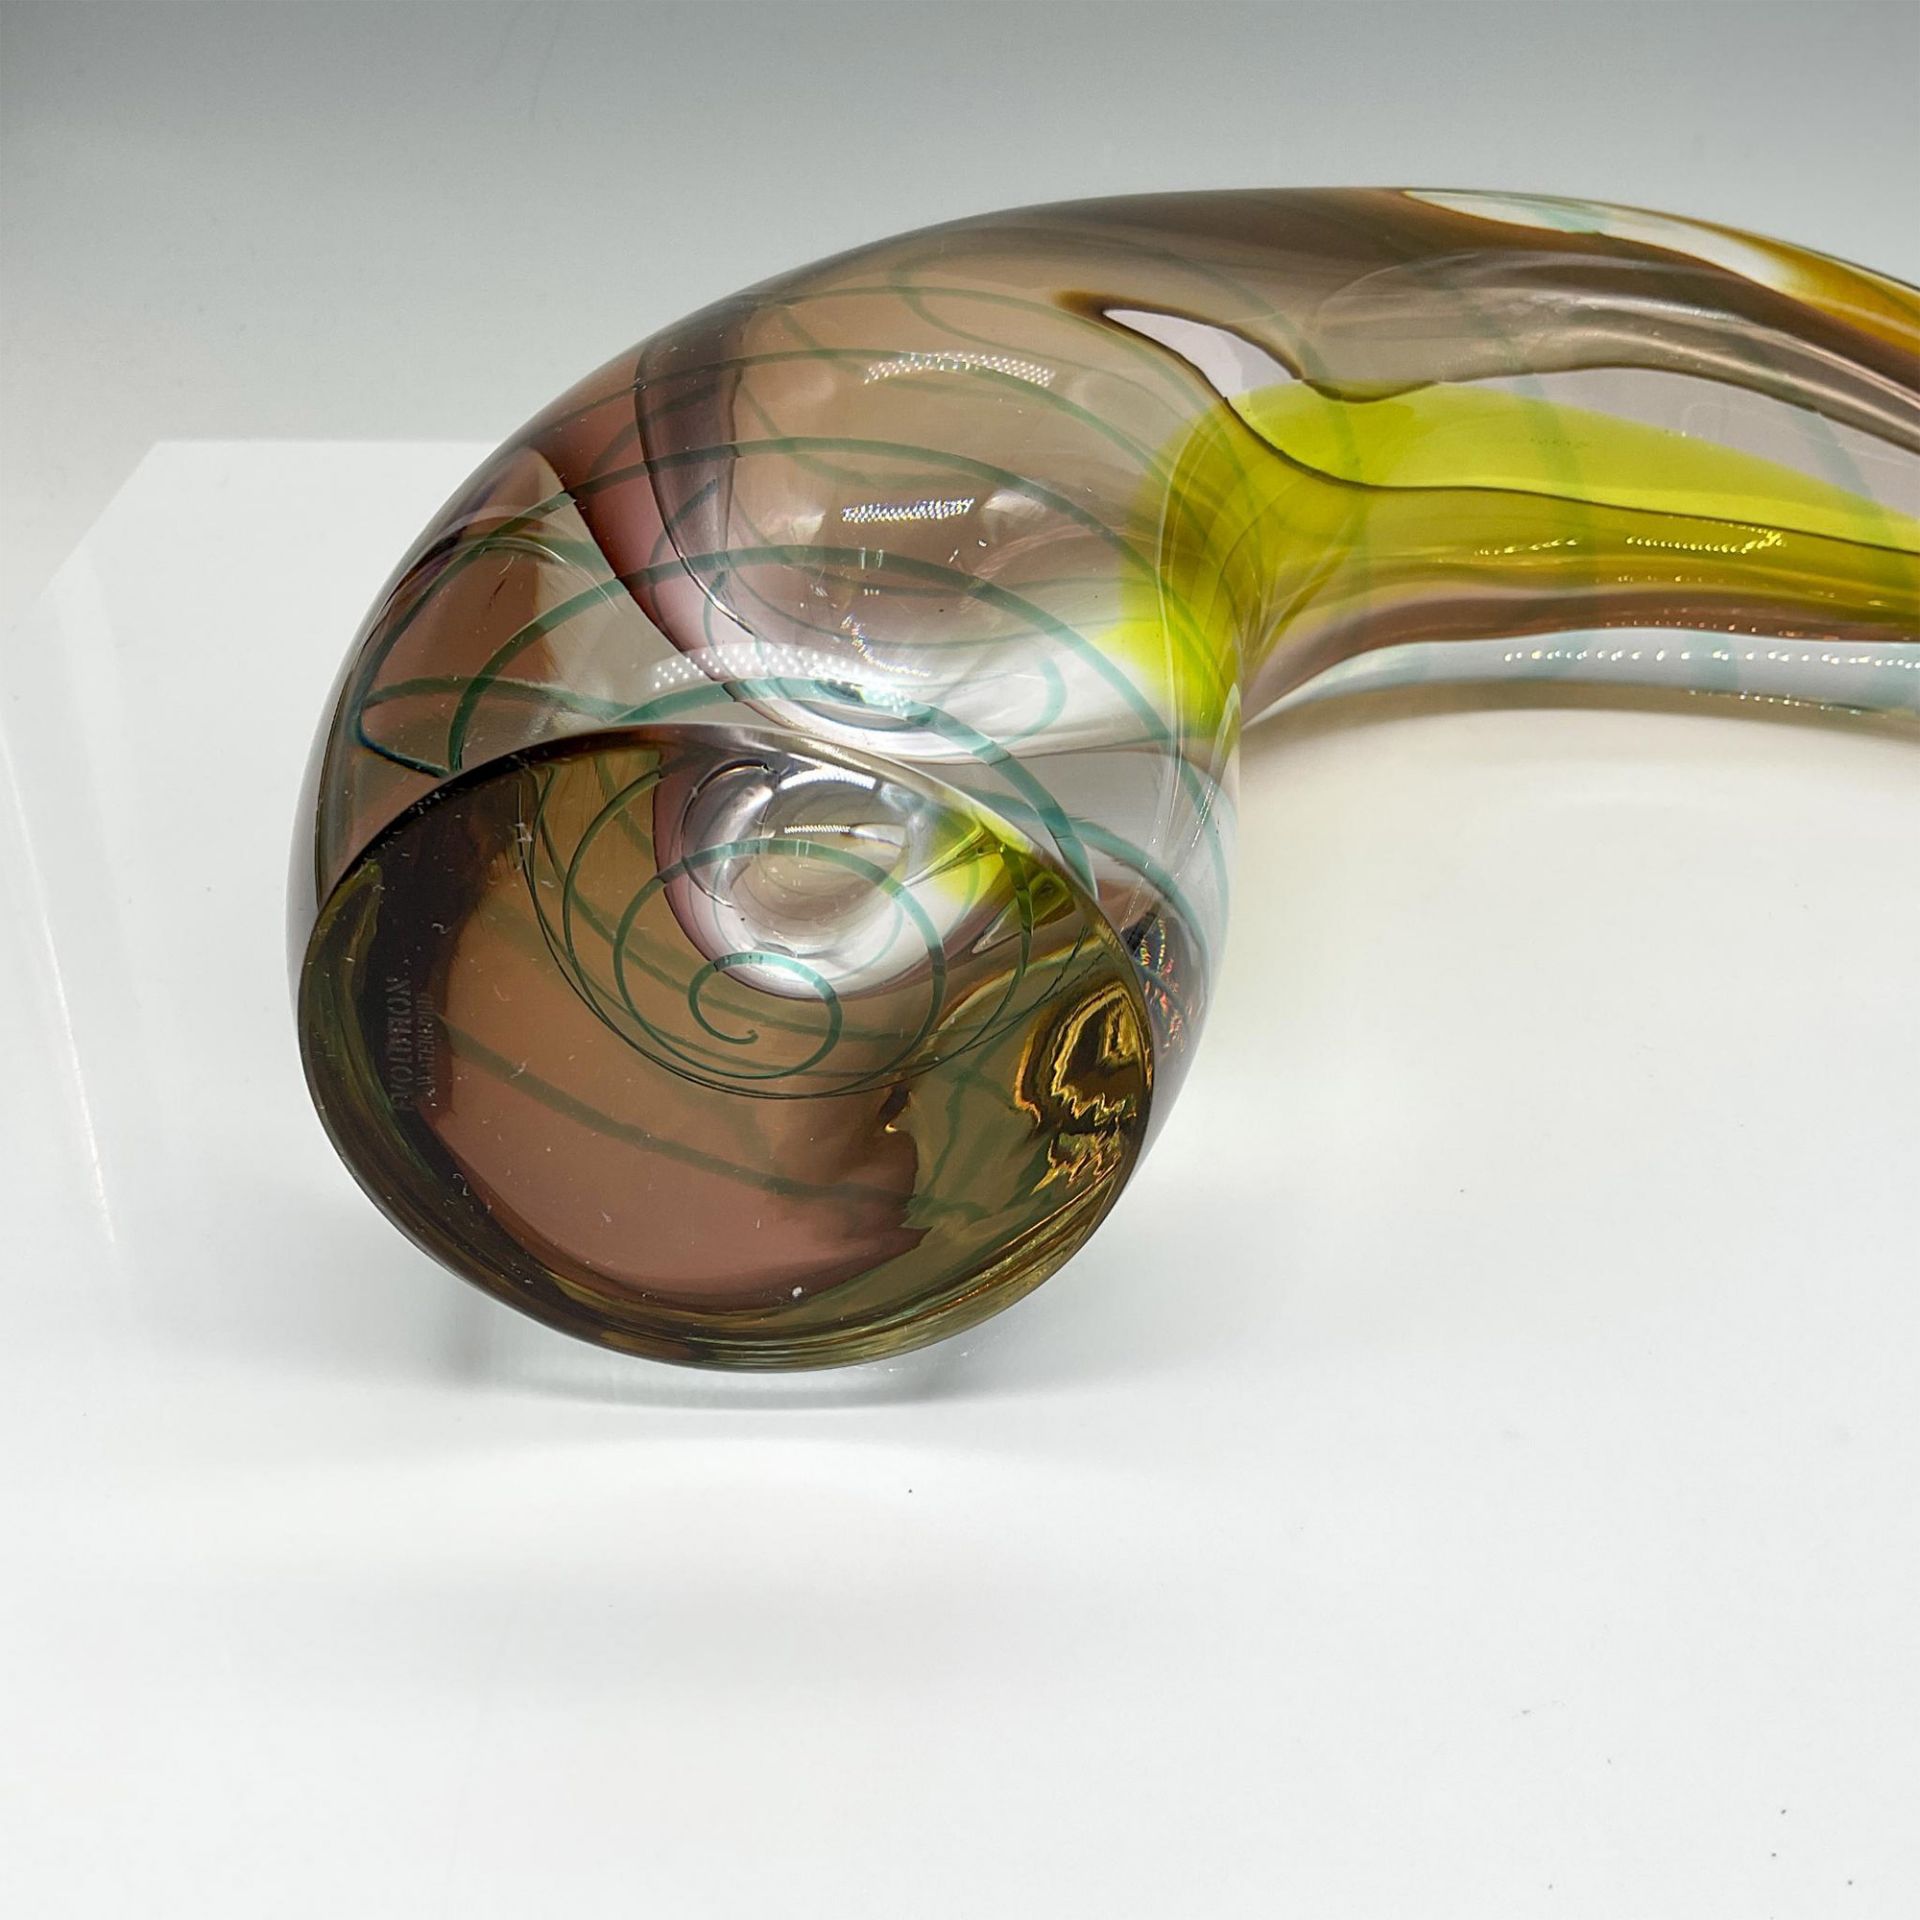 Evolution by Waterford Art Glass Sculpture Vase, Sea Breeze - Image 5 of 5